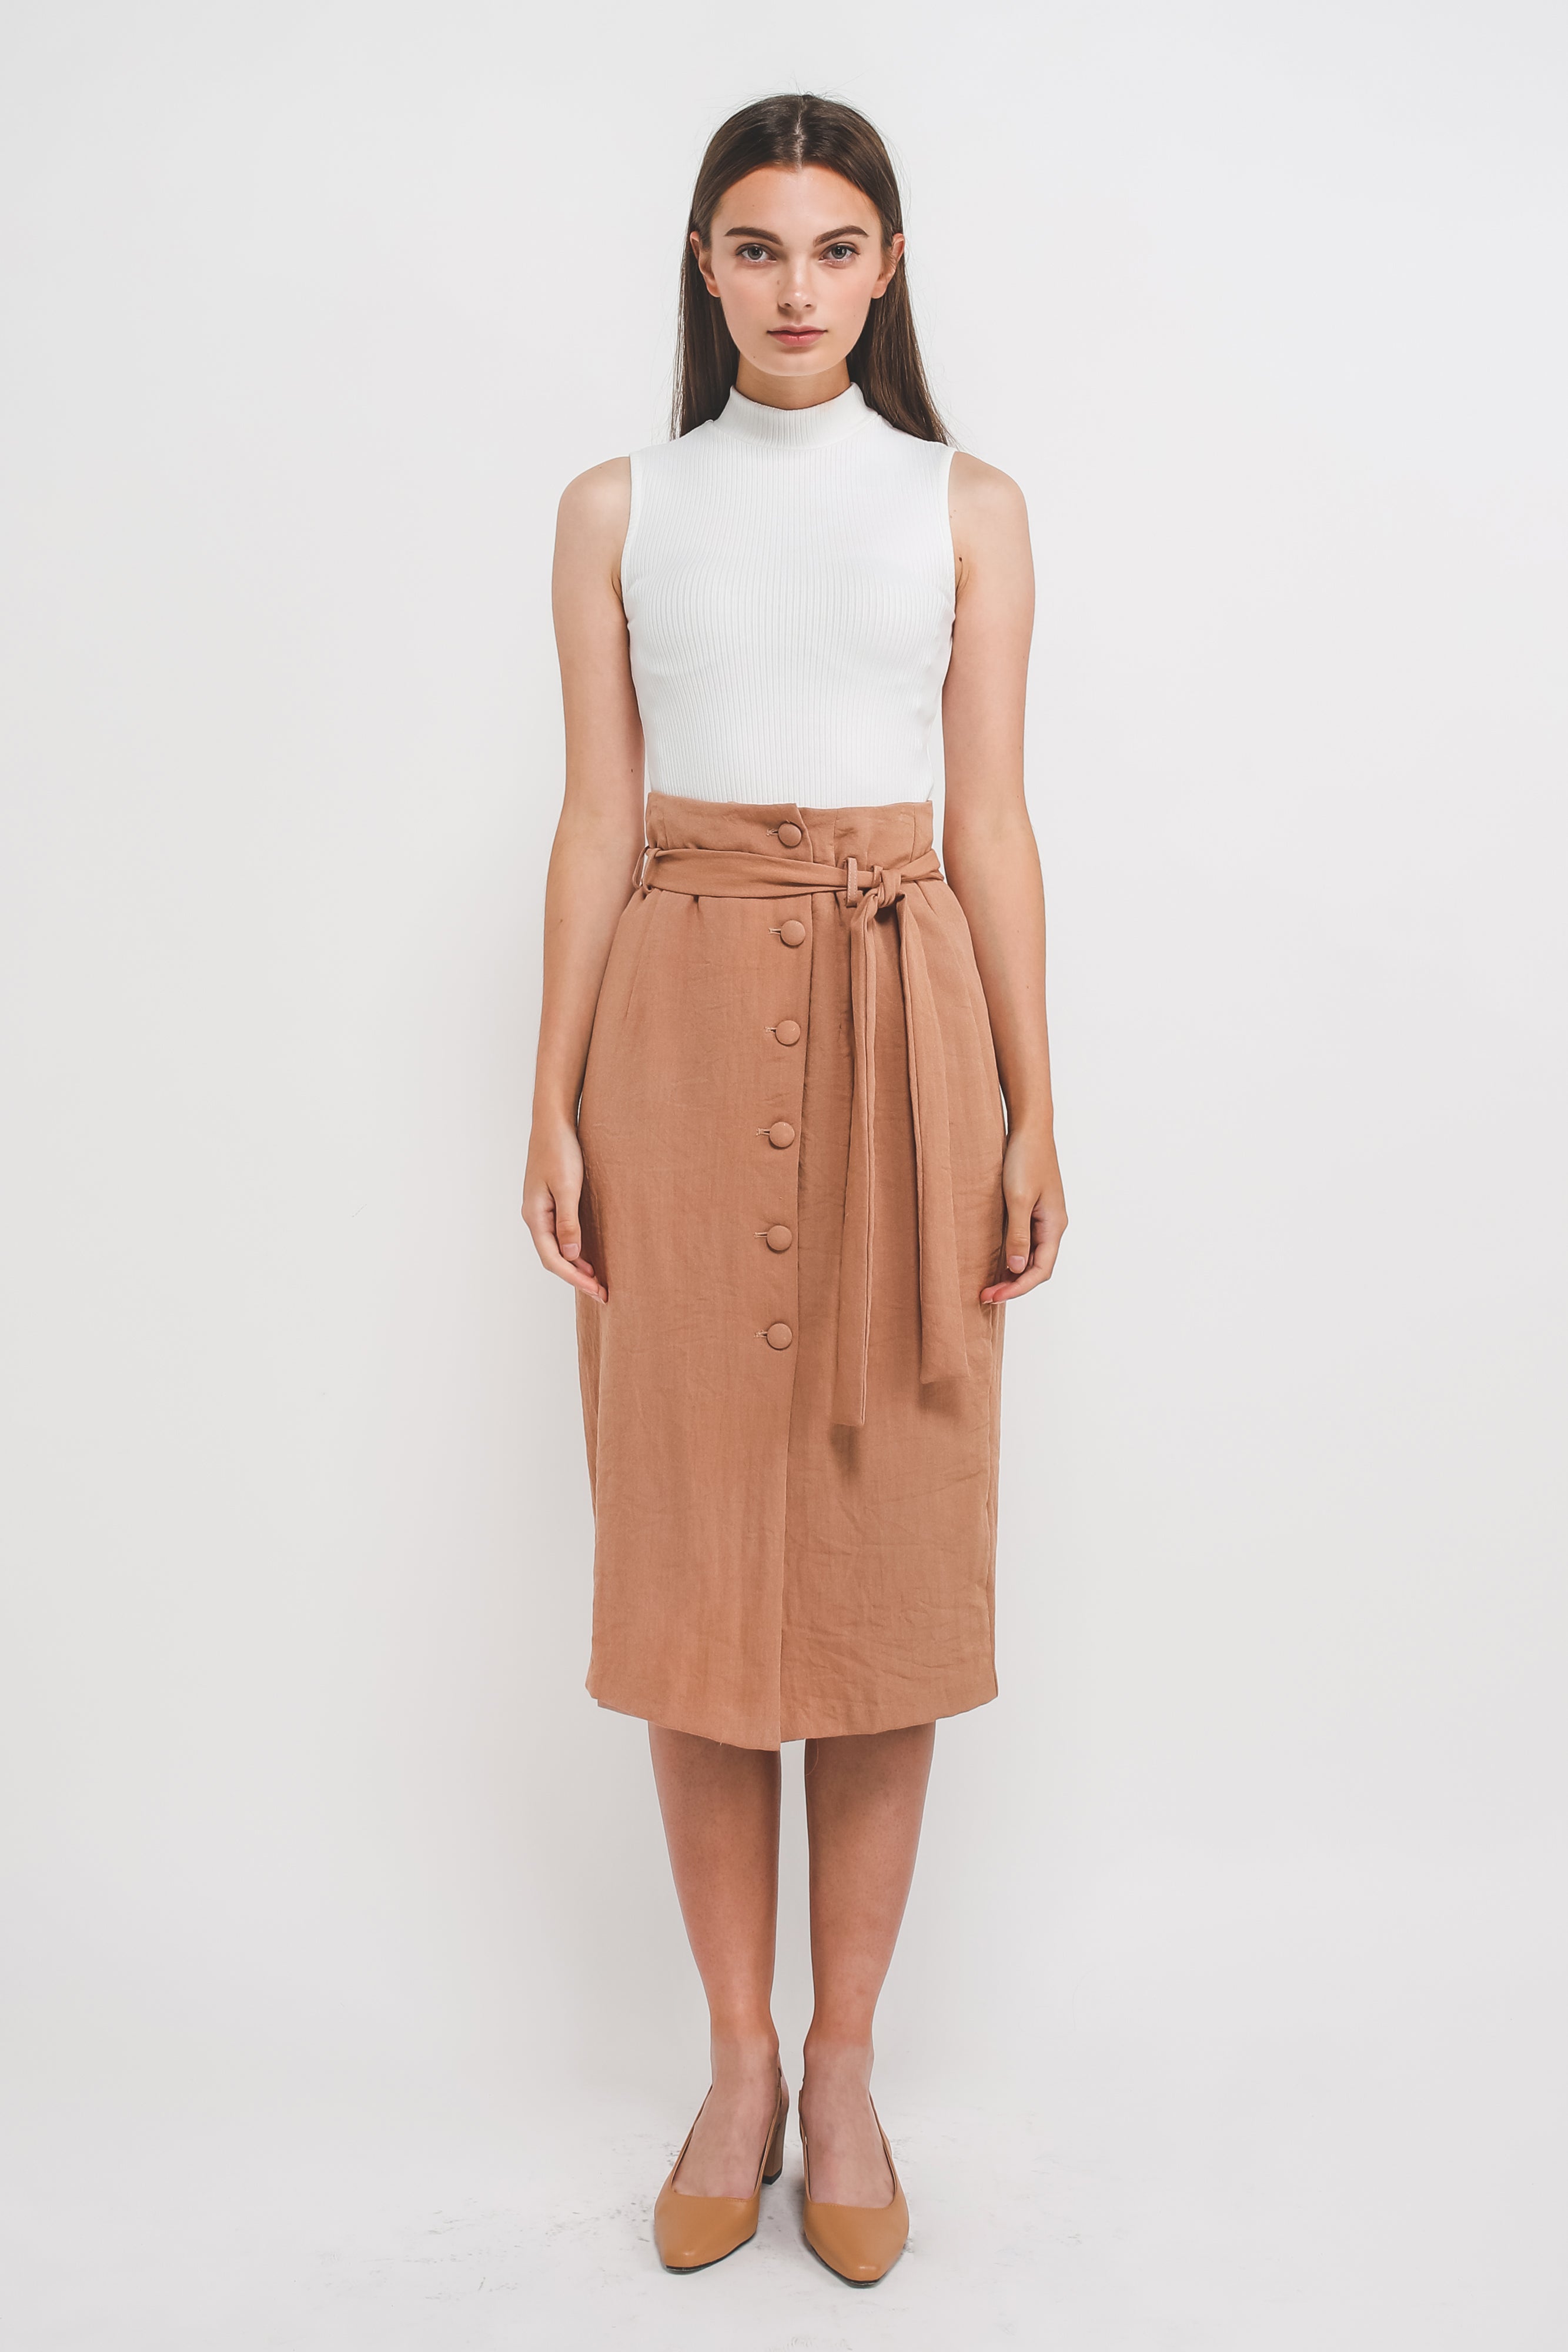 Textured Button Down Skirt w Sash In Taupe